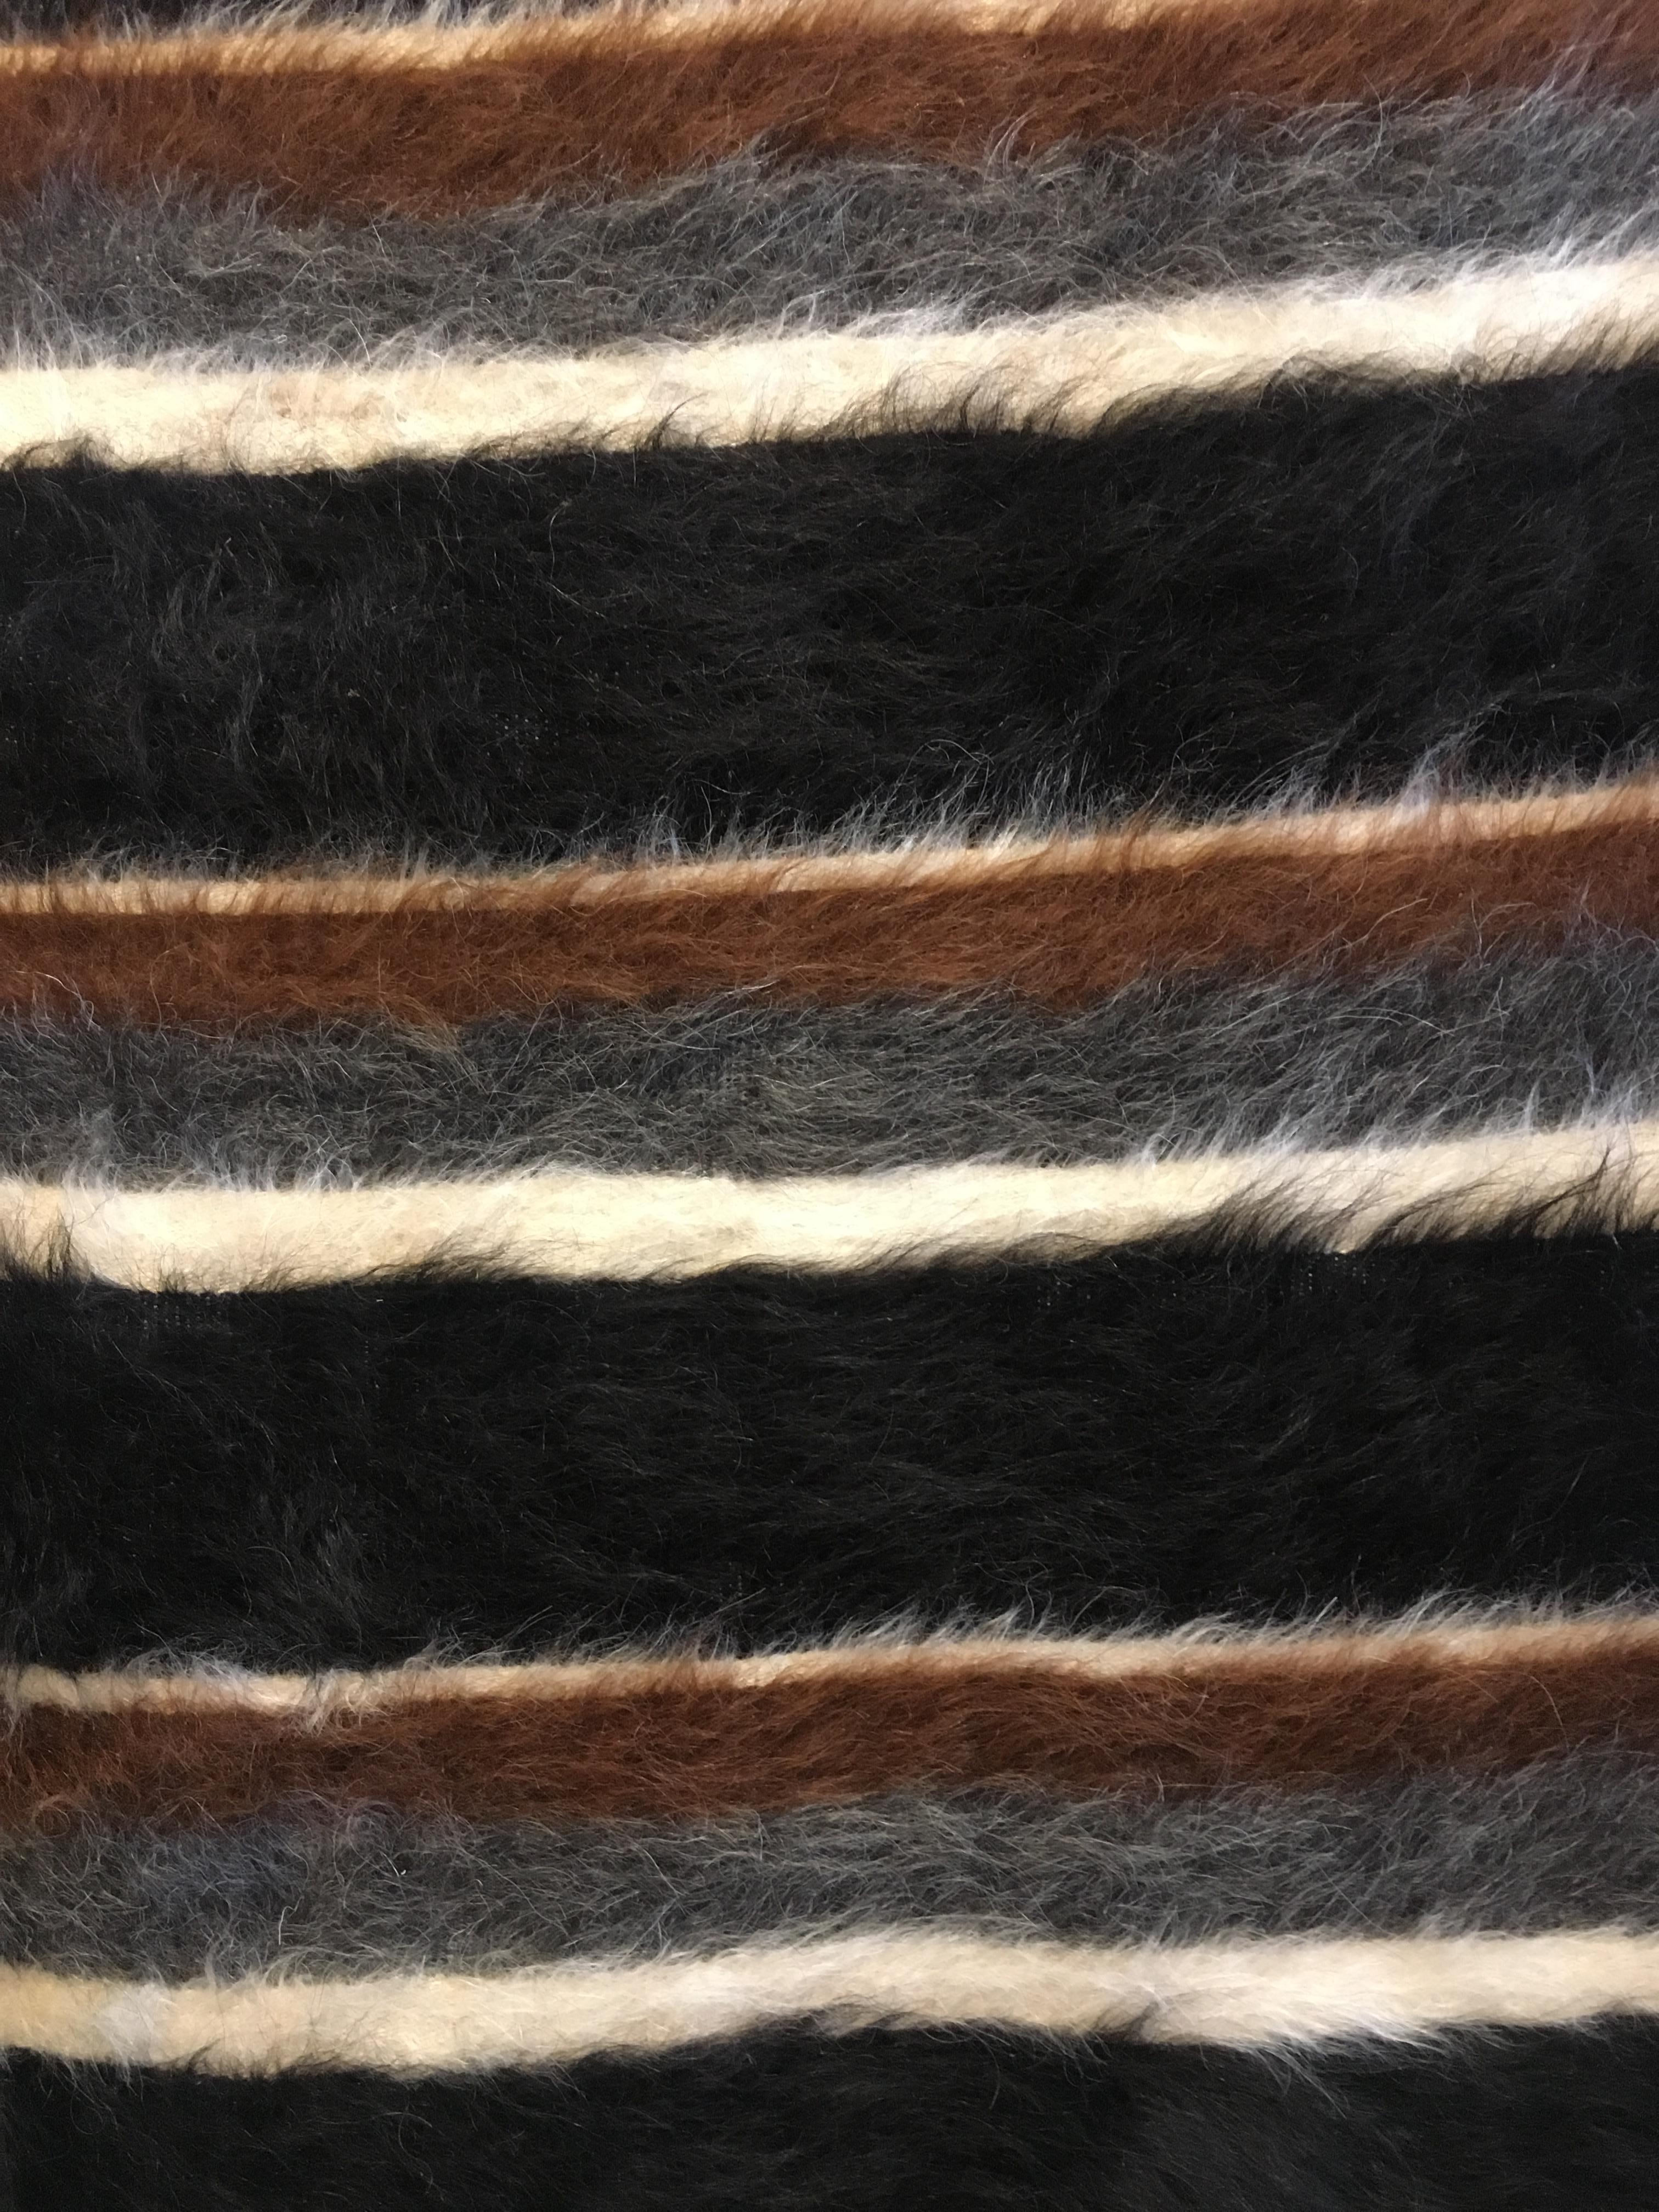 Handwoven in eastern Turkey, this small rug has a cotton foundation and a woven soft goat hair pile using all natural, undyed colors of black brown and ivory. In excellent condition, with a truly great look.